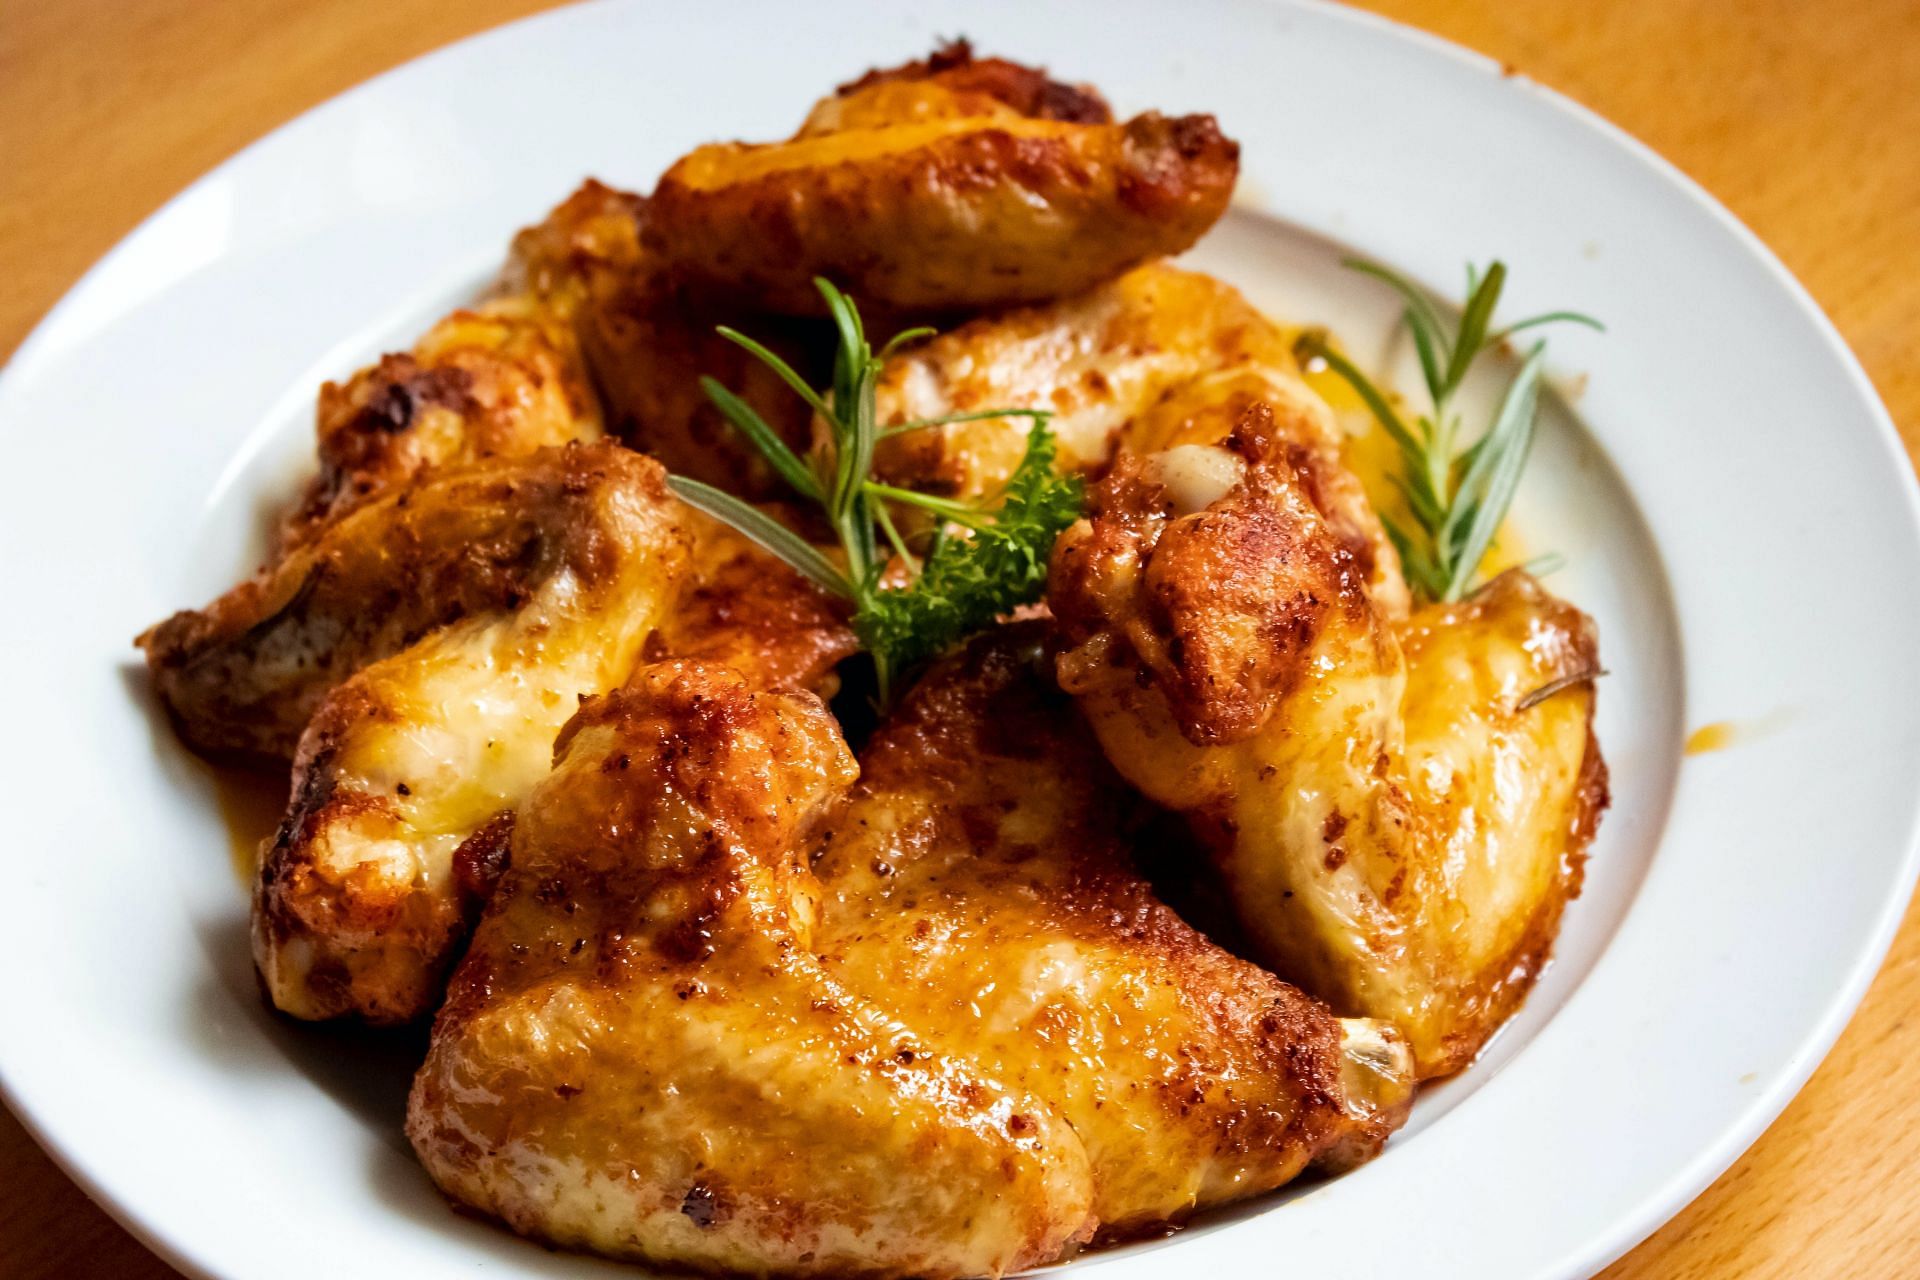 For speedy recovery, include chicken or turkey as a part of your meal. (Image by Harry Dona / Pexels)